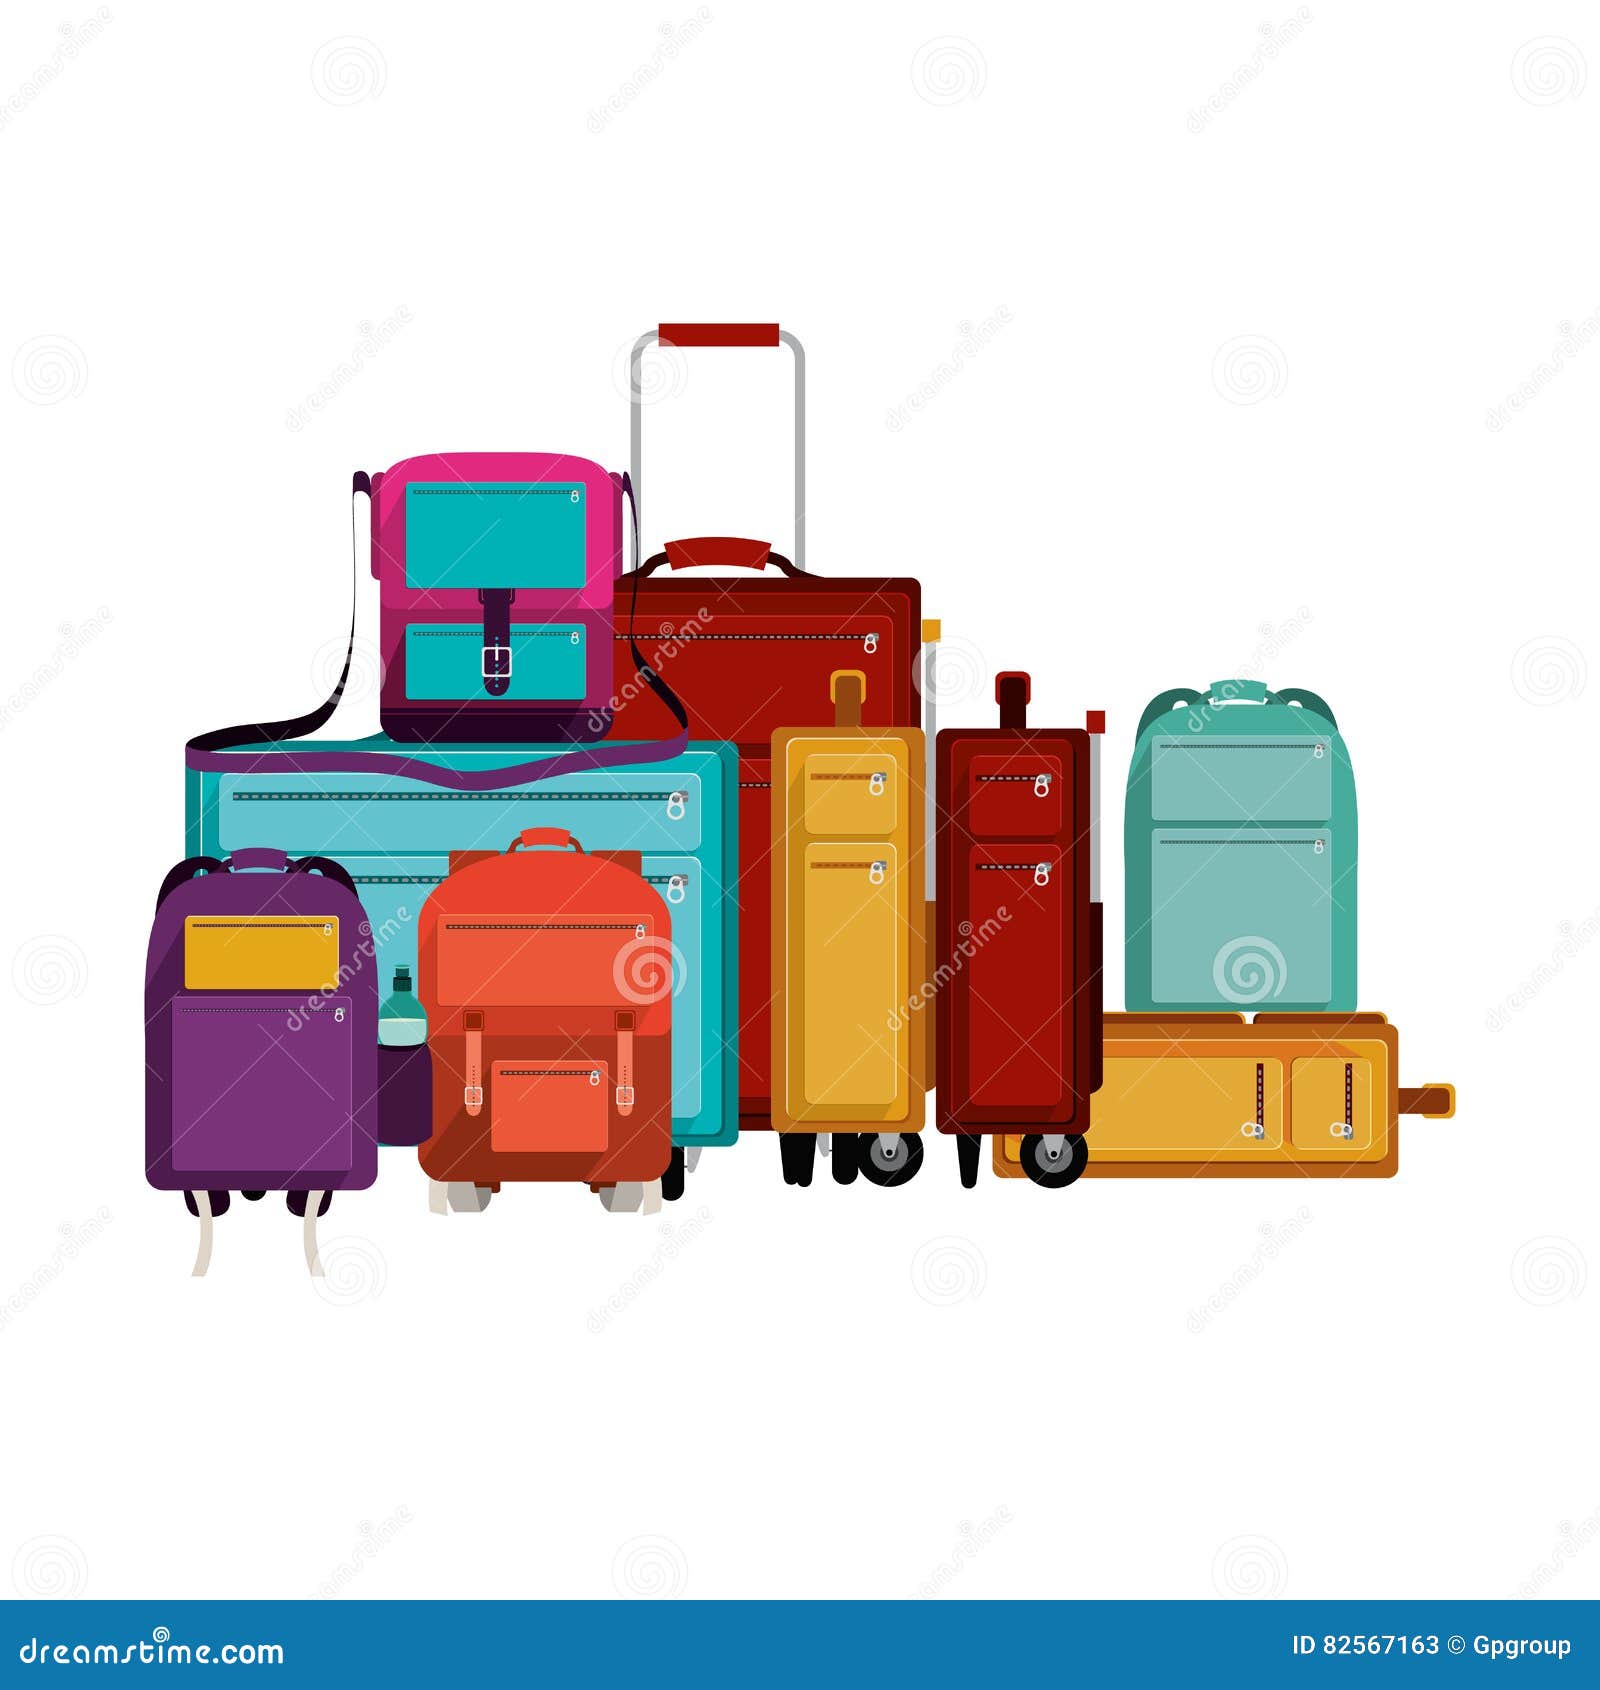 Isolated baggage design stock vector. Illustration of design - 82567163